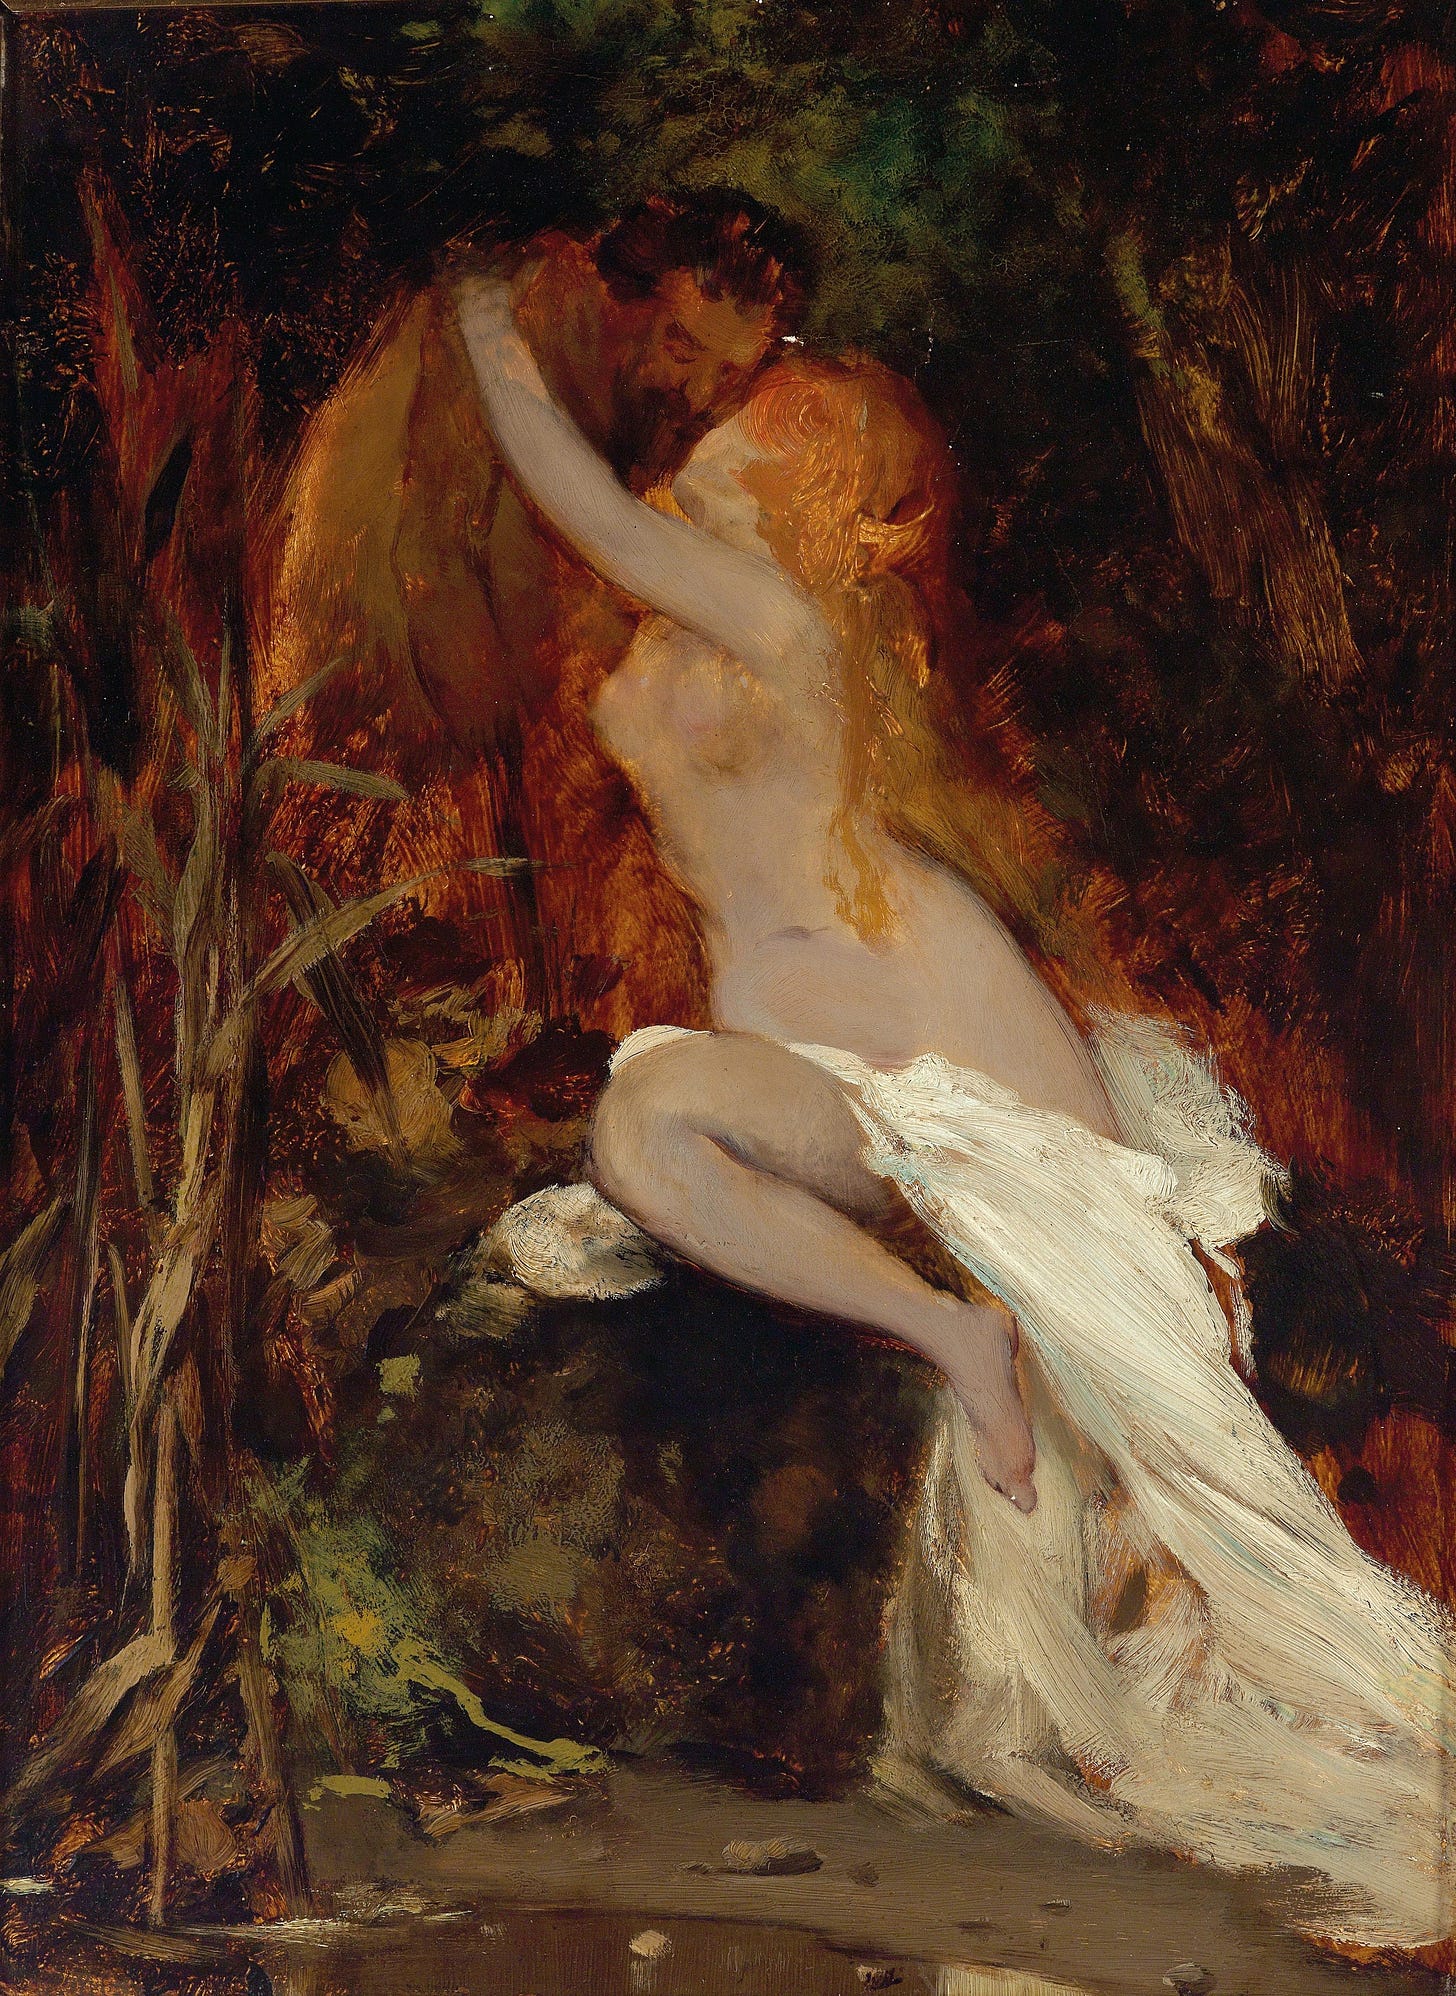 Faun And Nymph (1865-66) by Hans Makart